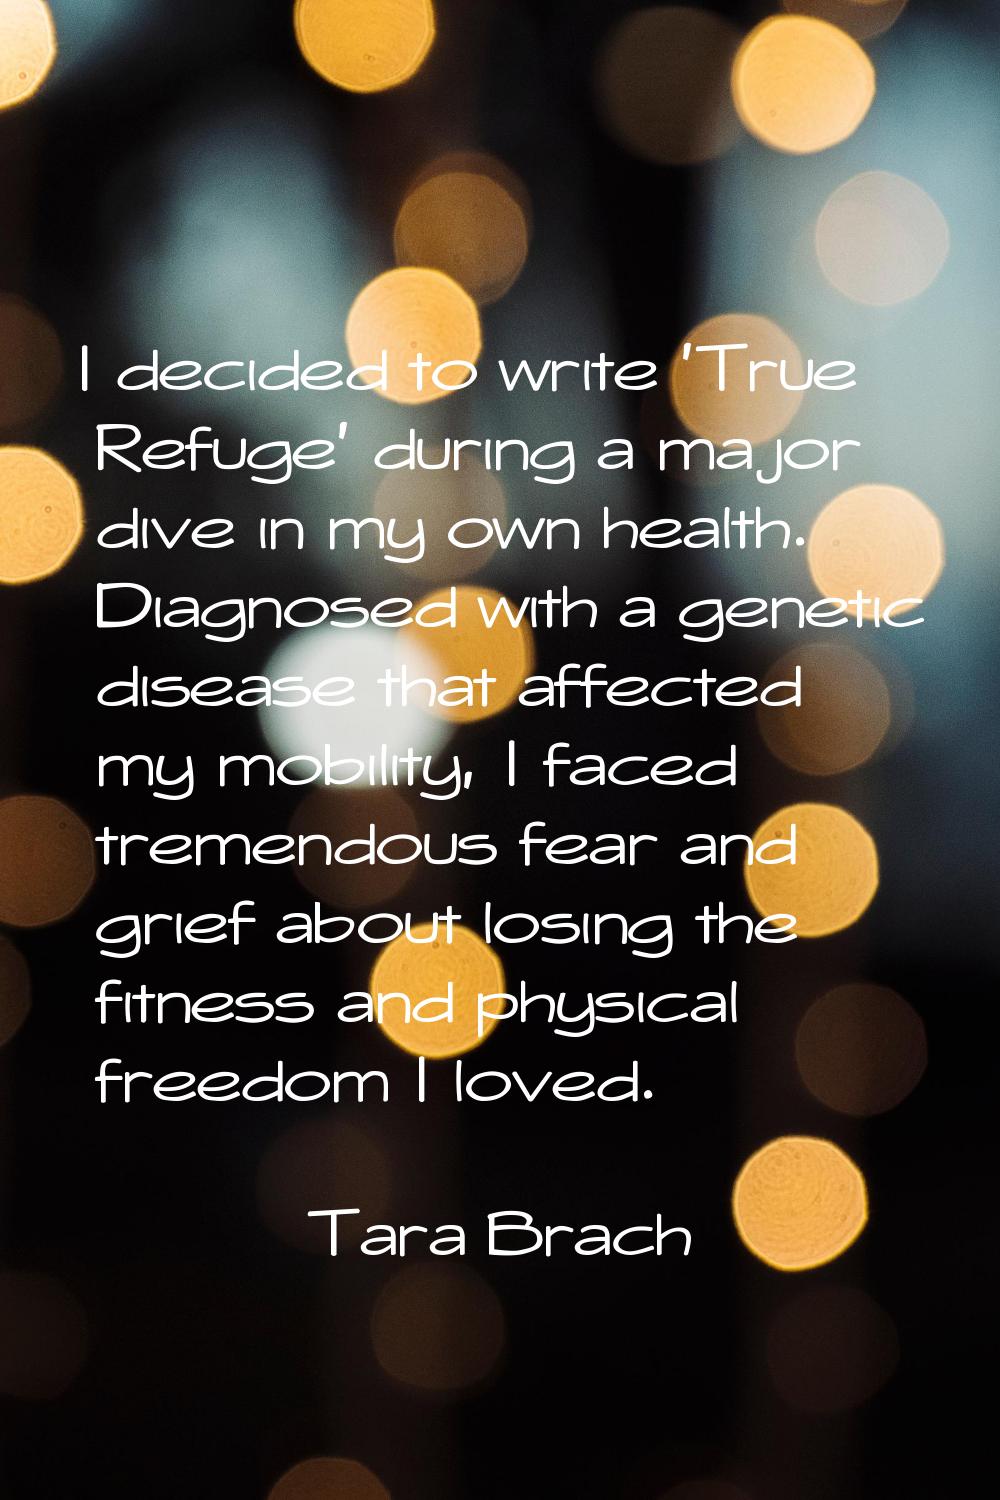 I decided to write 'True Refuge' during a major dive in my own health. Diagnosed with a genetic dis